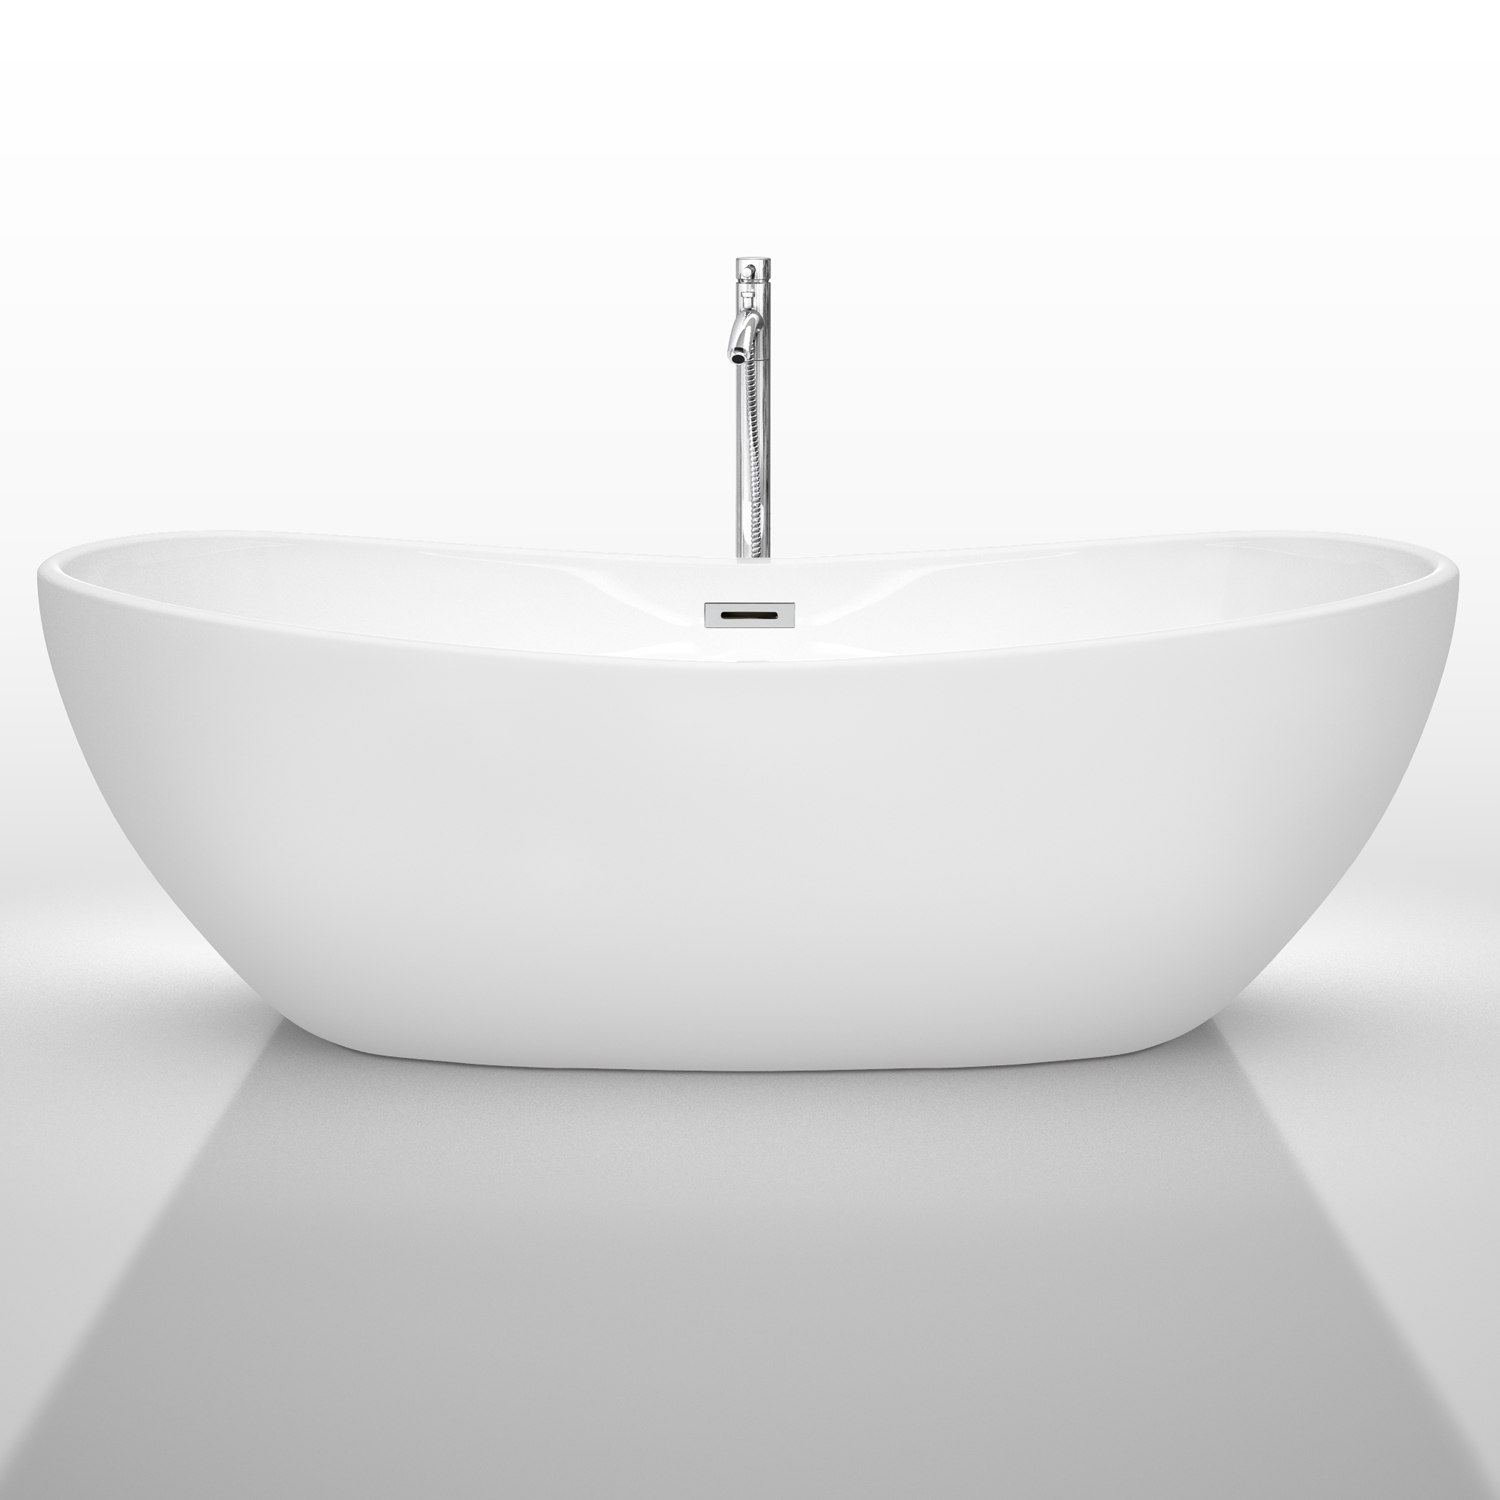 Rebecca 70 Soaking Bathtub by Wyndham Collection - White  Beautiful  bathroom furniture for every home - Wyndham Collection